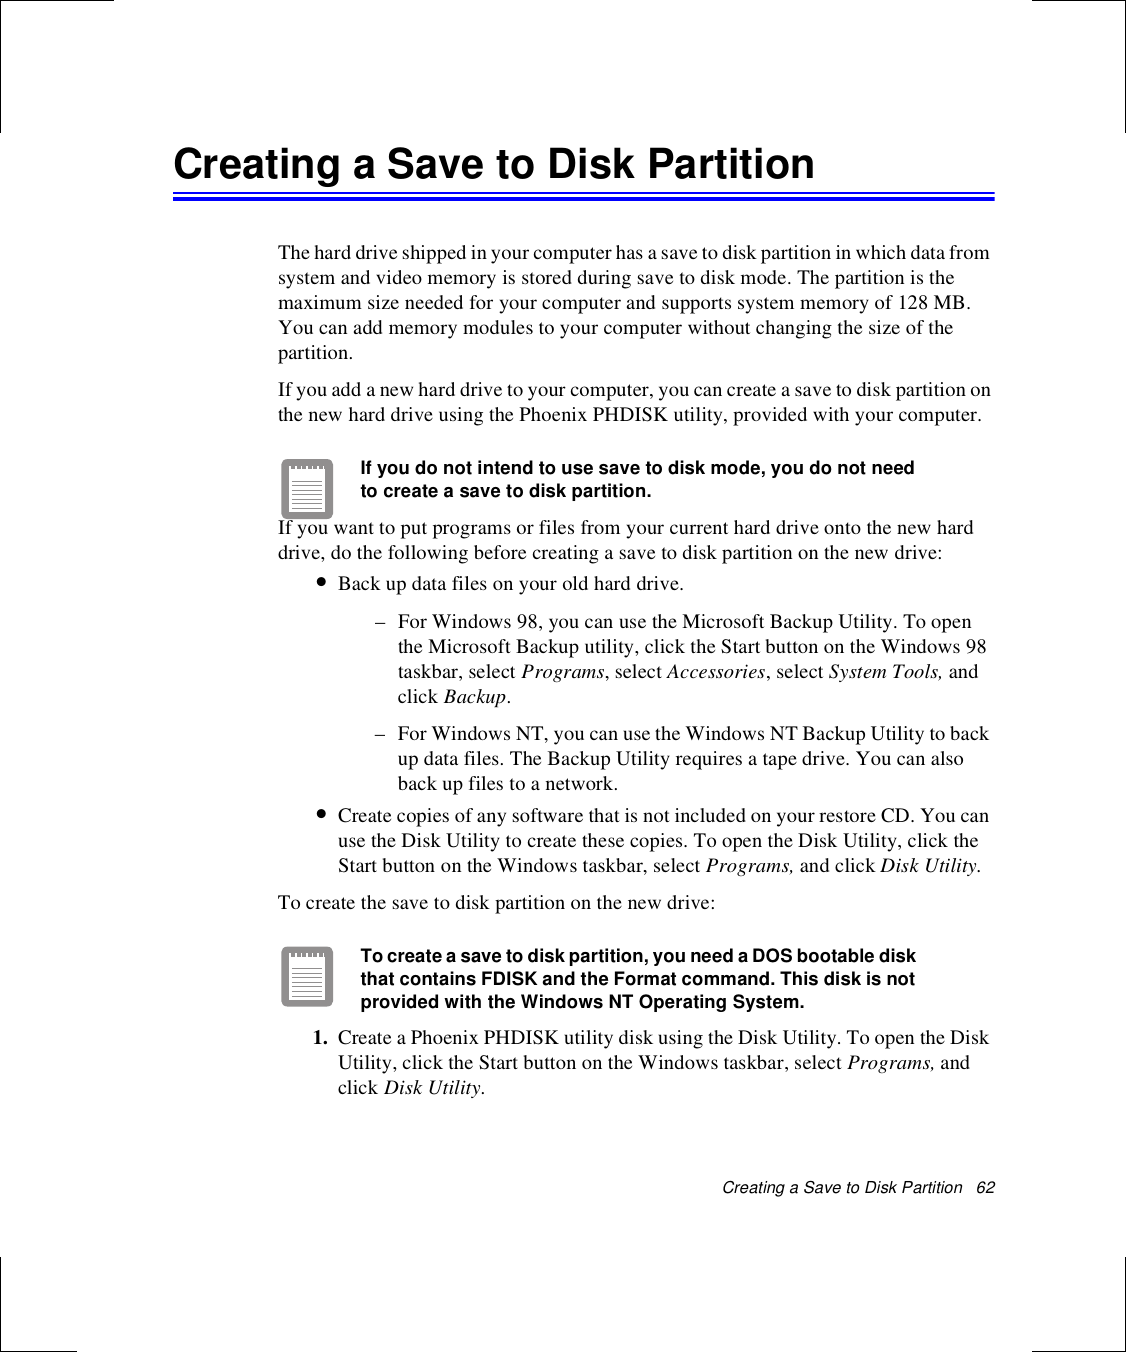 Creating a Save to Disk Partition   62Creating a Save to Disk PartitionThe hard drive shipped in your computer has a save to disk partition in which data from system and video memory is stored during save to disk mode. The partition is the maximum size needed for your computer and supports system memory of 128 MB. You can add memory modules to your computer without changing the size of the partition.If you add a new hard drive to your computer, you can create a save to disk partition on the new hard drive using the Phoenix PHDISK utility, provided with your computer. If you do not intend to use save to disk mode, you do not need to create a save to disk partition. If you want to put programs or files from your current hard drive onto the new hard drive, do the following before creating a save to disk partition on the new drive:•Back up data files on your old hard drive. – For Windows 98, you can use the Microsoft Backup Utility. To open the Microsoft Backup utility, click the Start button on the Windows 98 taskbar, select Programs, select Accessories, select System Tools, and click Backup.– For Windows NT, you can use the Windows NT Backup Utility to back up data files. The Backup Utility requires a tape drive. You can also back up files to a network.•Create copies of any software that is not included on your restore CD. You can use the Disk Utility to create these copies. To open the Disk Utility, click the Start button on the Windows taskbar, select Programs, and click Disk Utility.To create the save to disk partition on the new drive:To create a save to disk partition, you need a DOS bootable disk that contains FDISK and the Format command. This disk is not provided with the Windows NT Operating System.1. Create a Phoenix PHDISK utility disk using the Disk Utility. To open the Disk Utility, click the Start button on the Windows taskbar, select Programs, and click Disk Utility.